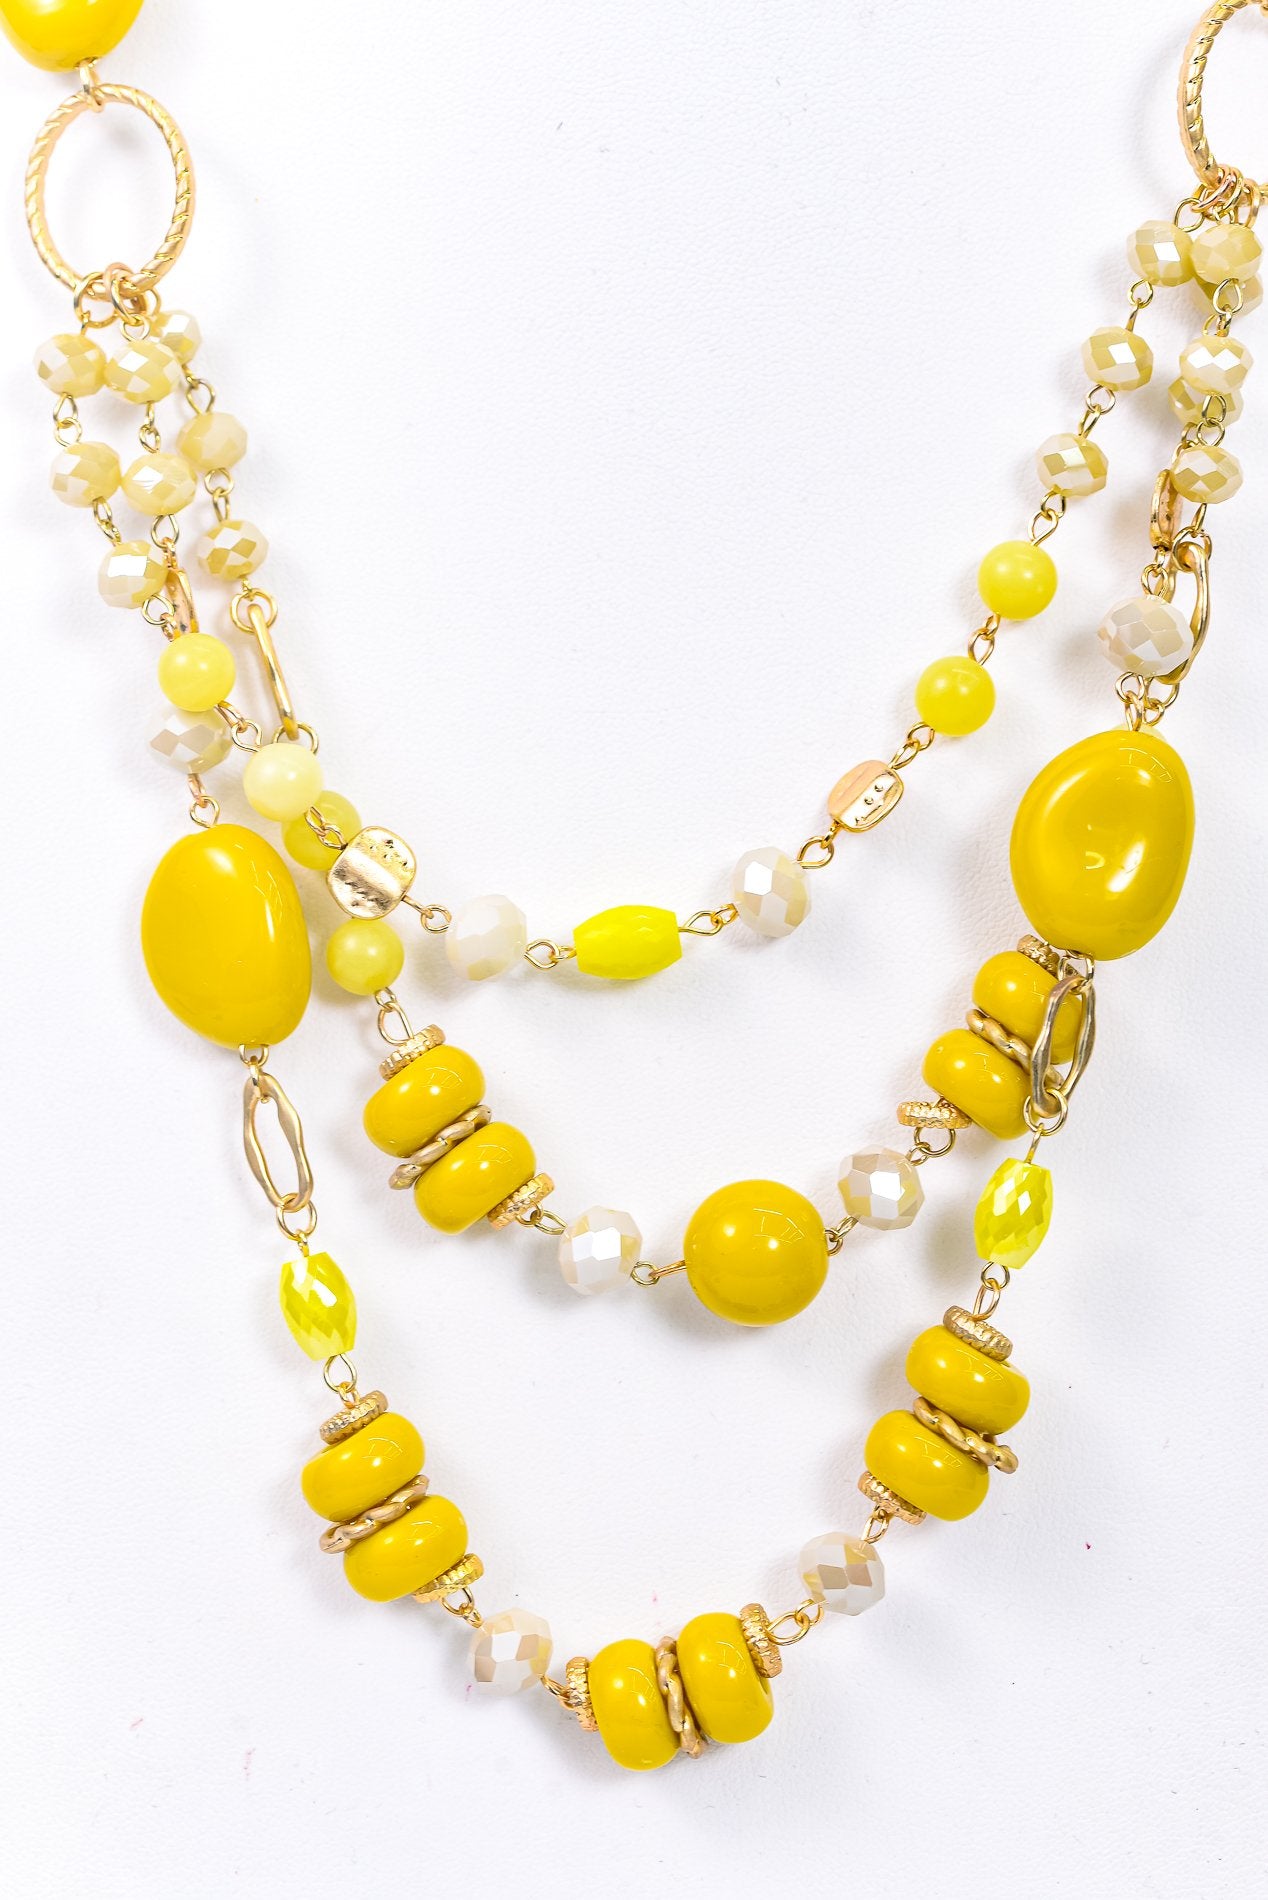 Yellow/Ivory/Gold Layered/Glass Beaded Necklace - NEK3788YW